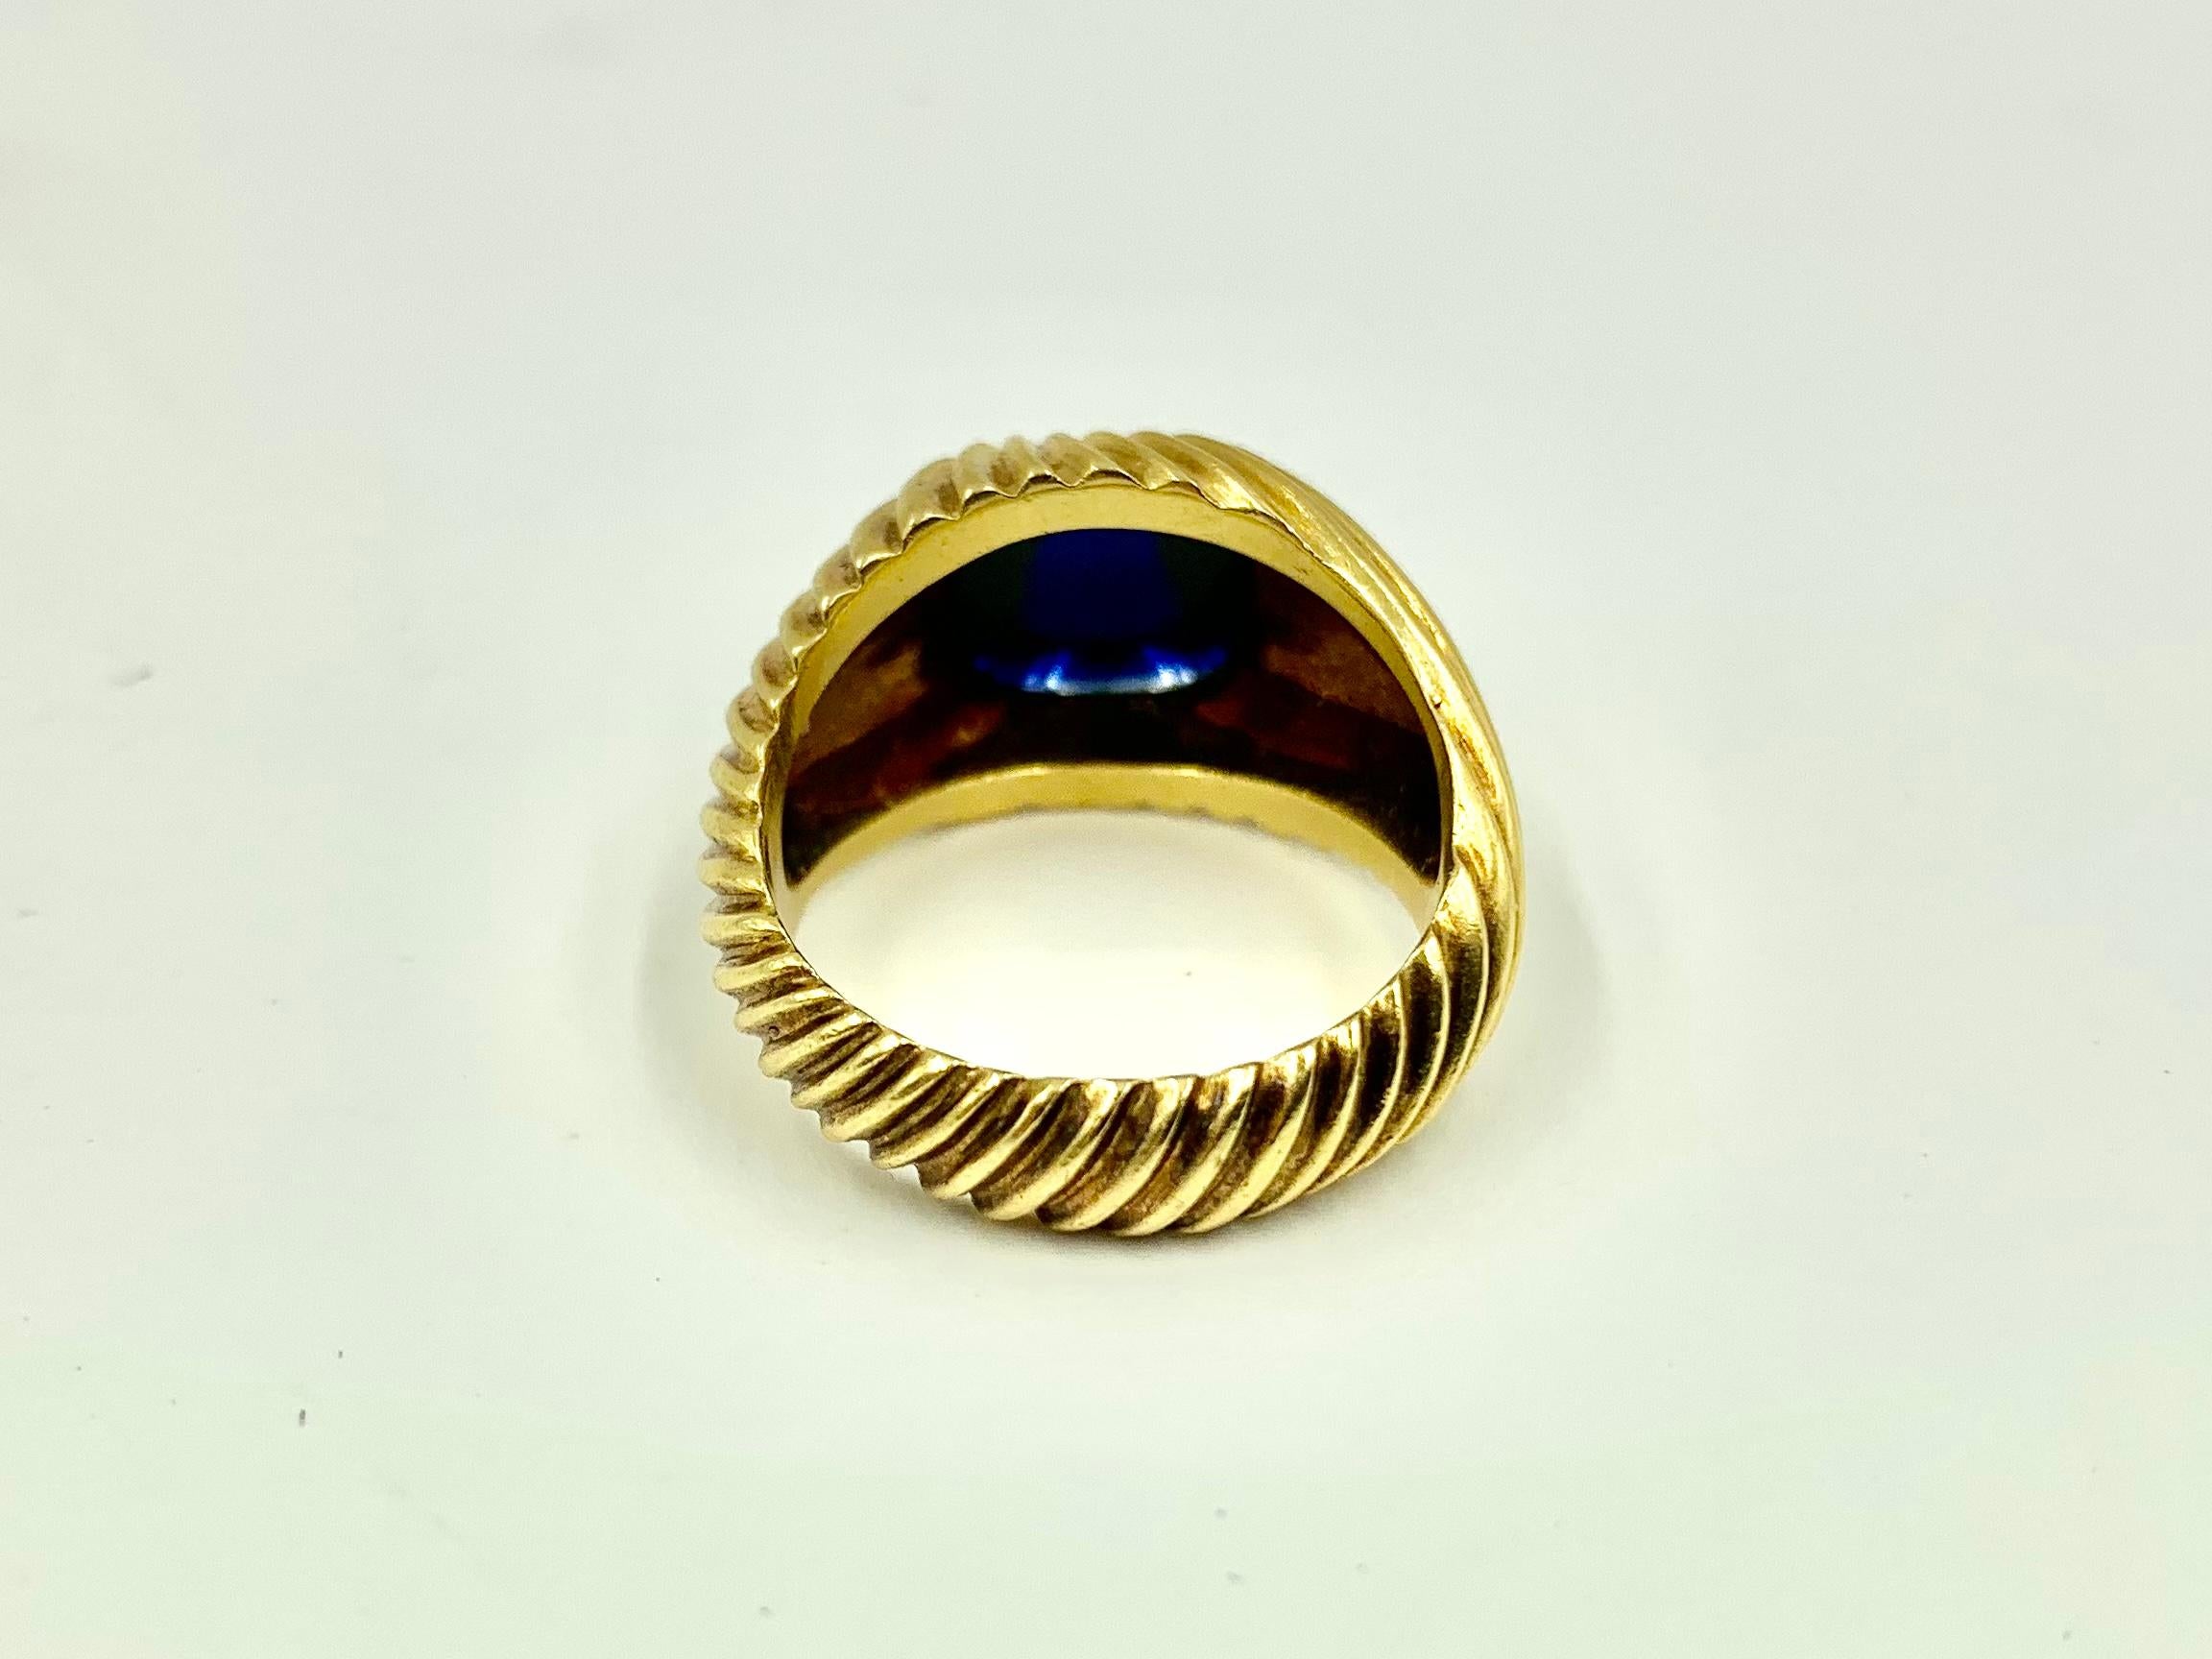 Vintage Sugarloaf Cabochon Sapphire 18K Yellow Gold Tourbillon Twist Ring For Sale 1